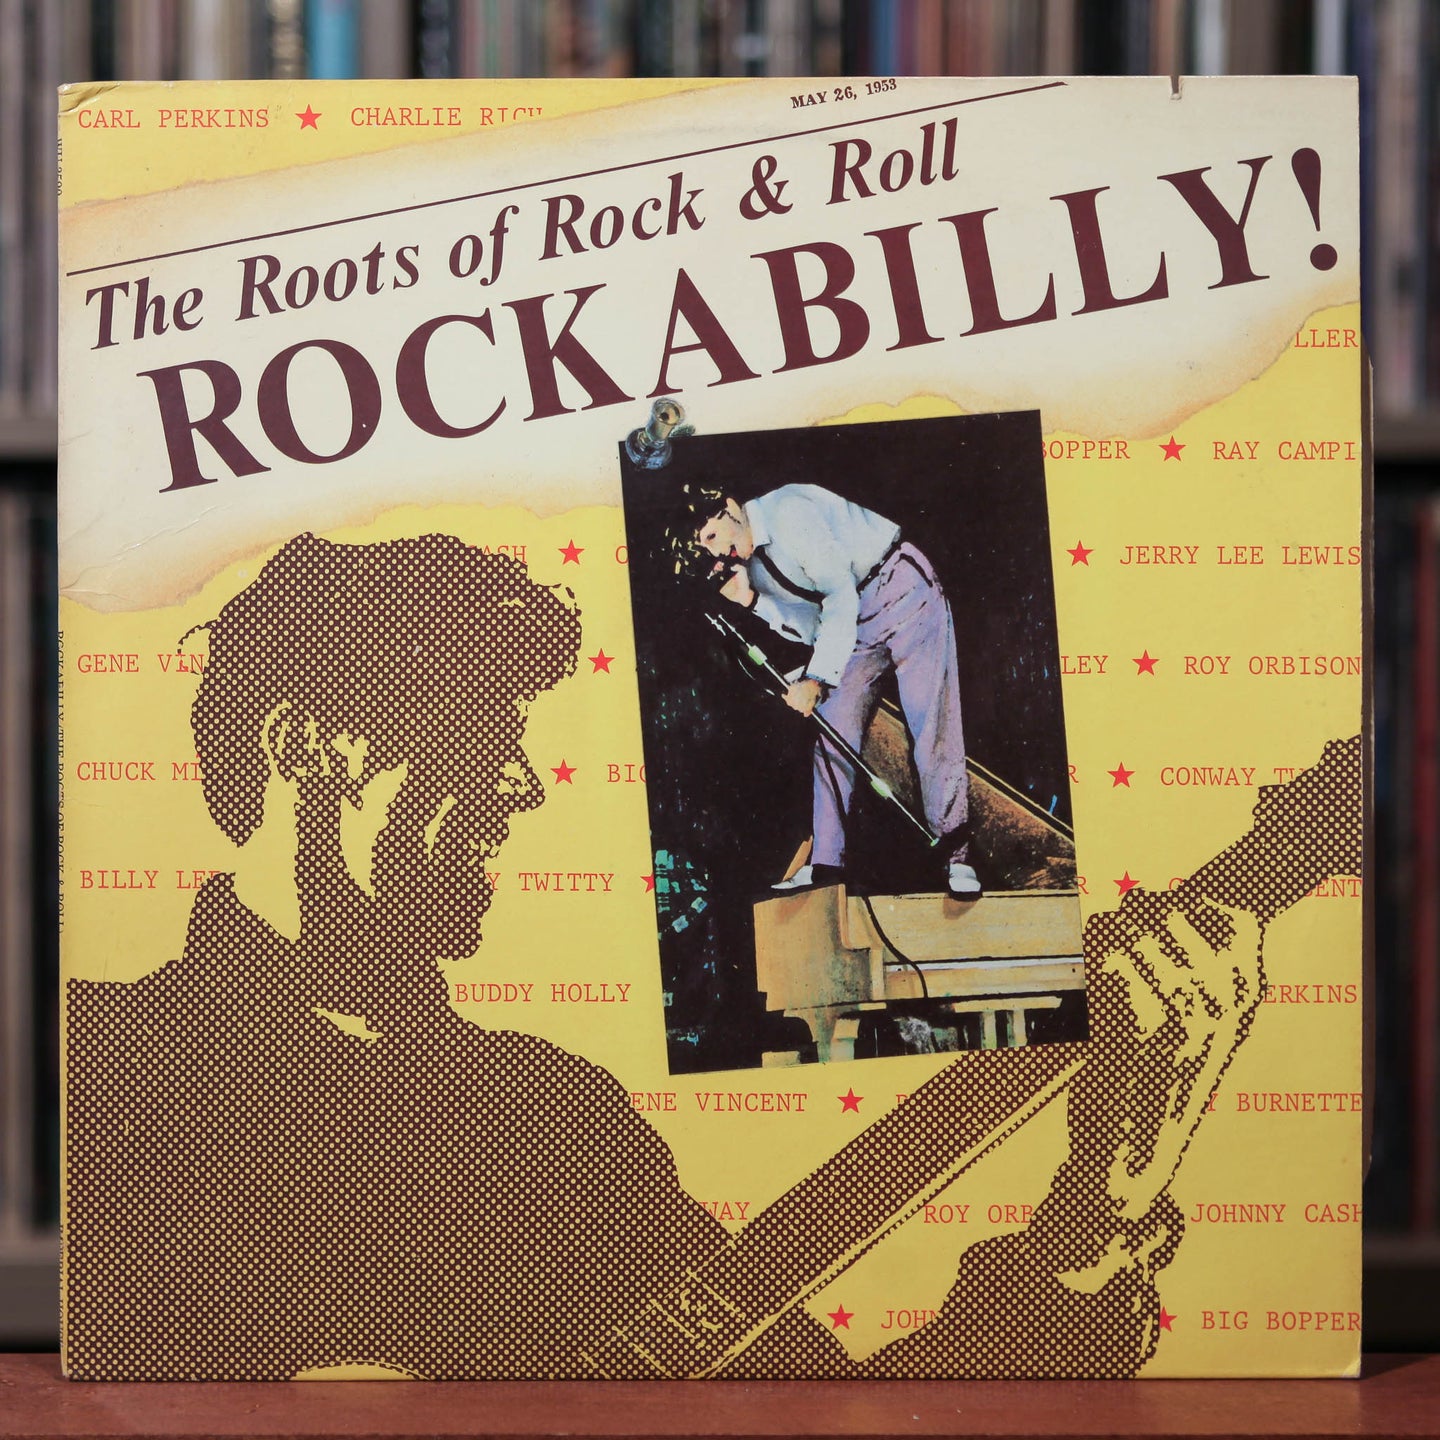 Rockabilly (The Roots Of Rock & Roll) - 1982 Imperial House, EX/EX